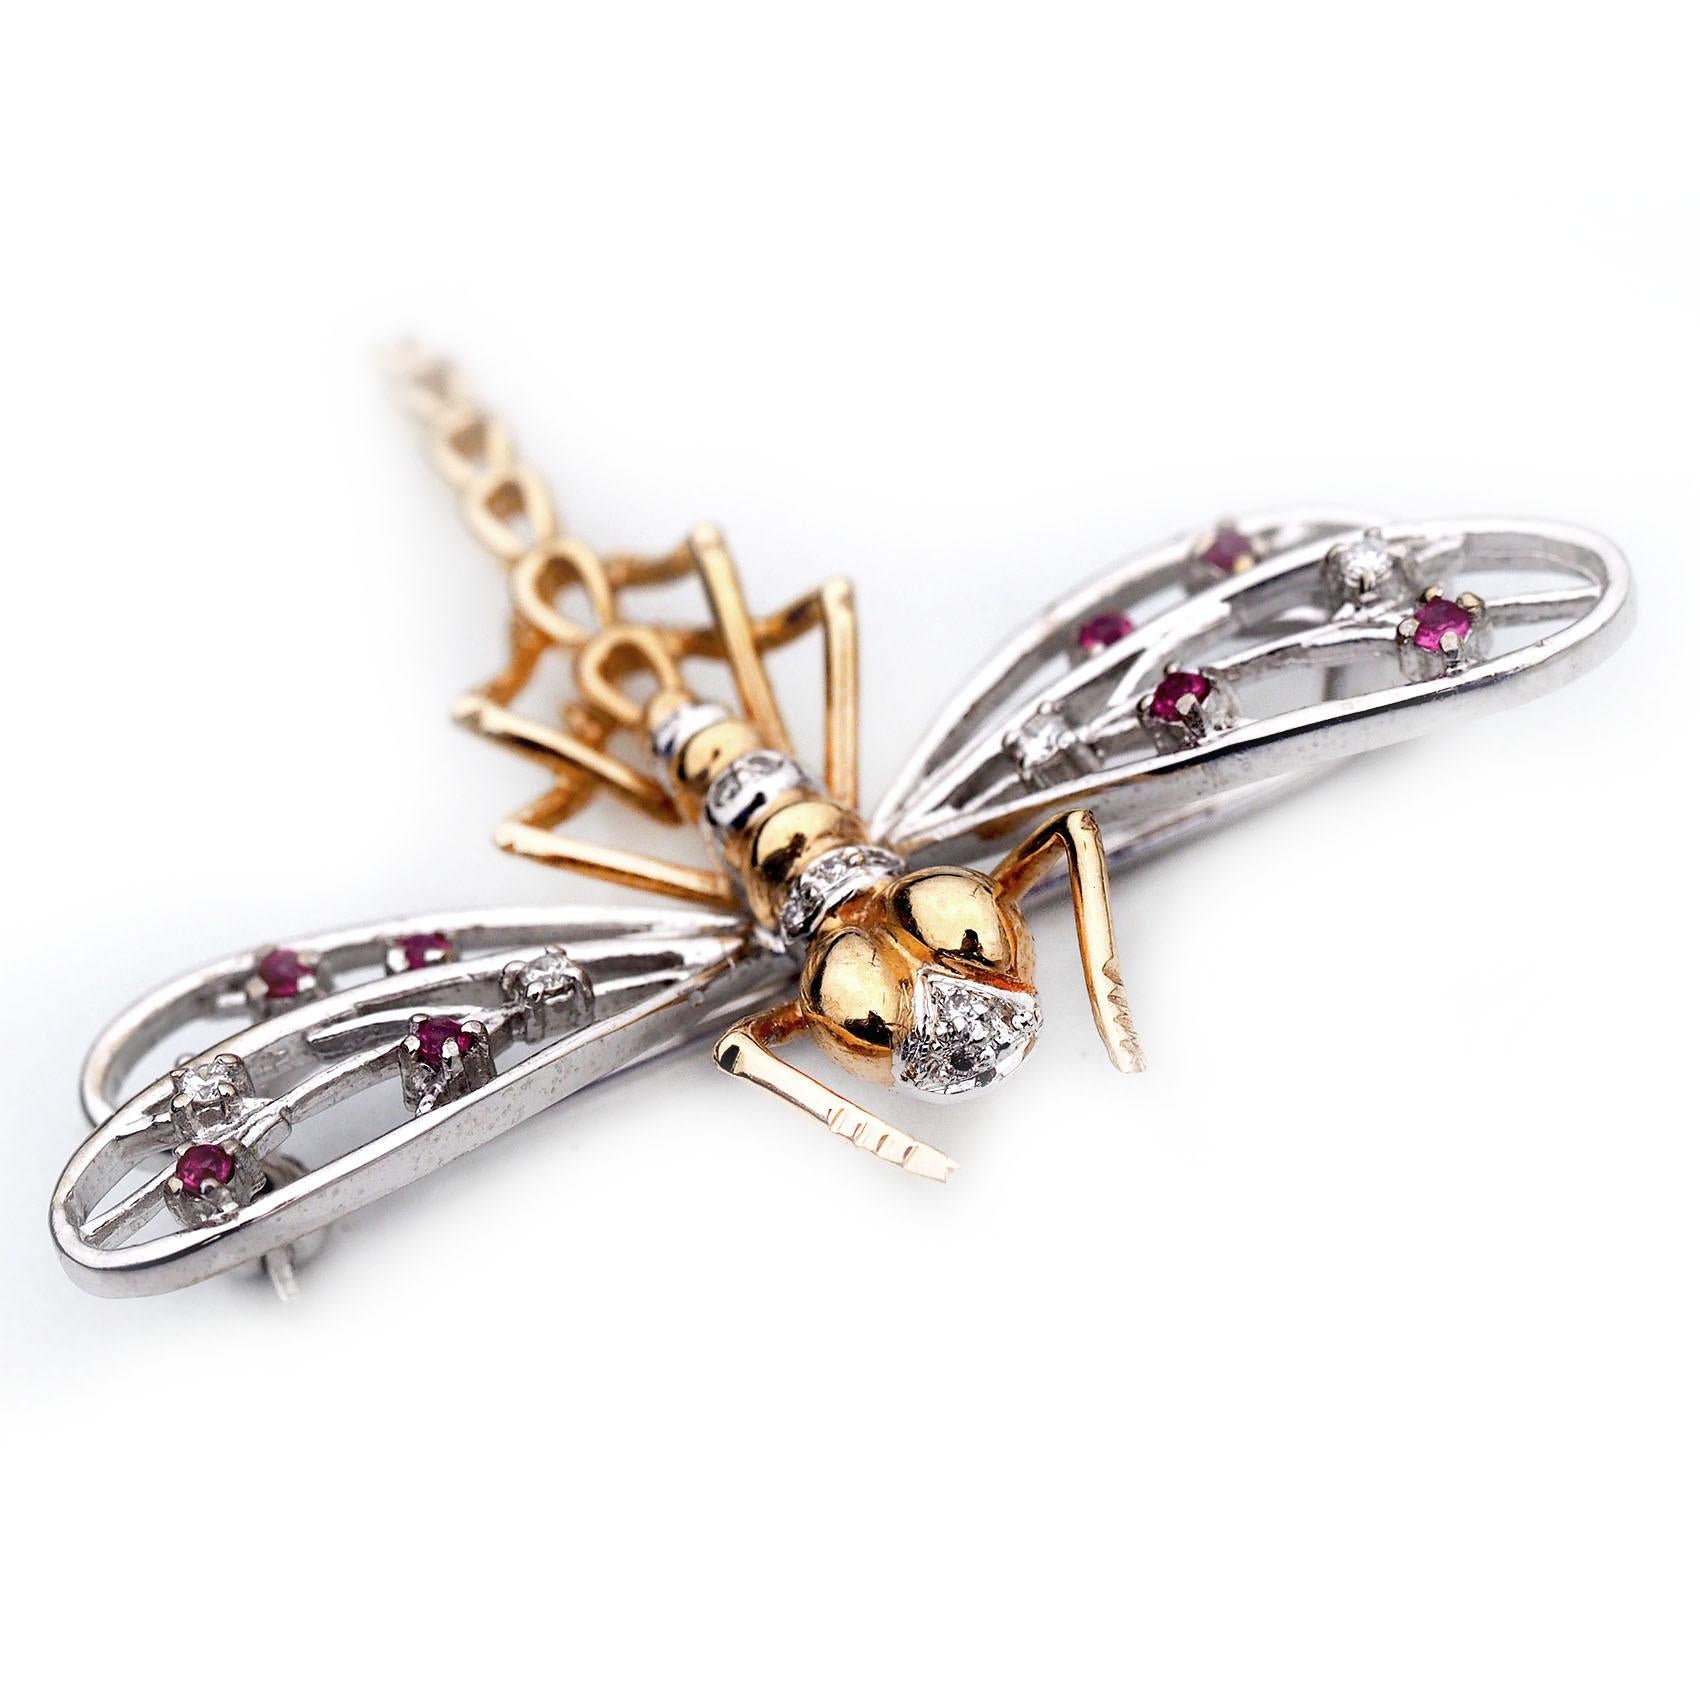 Modern 14 Karat Yellow and White Gold Dragonfly Pin with Rubies and Diamonds